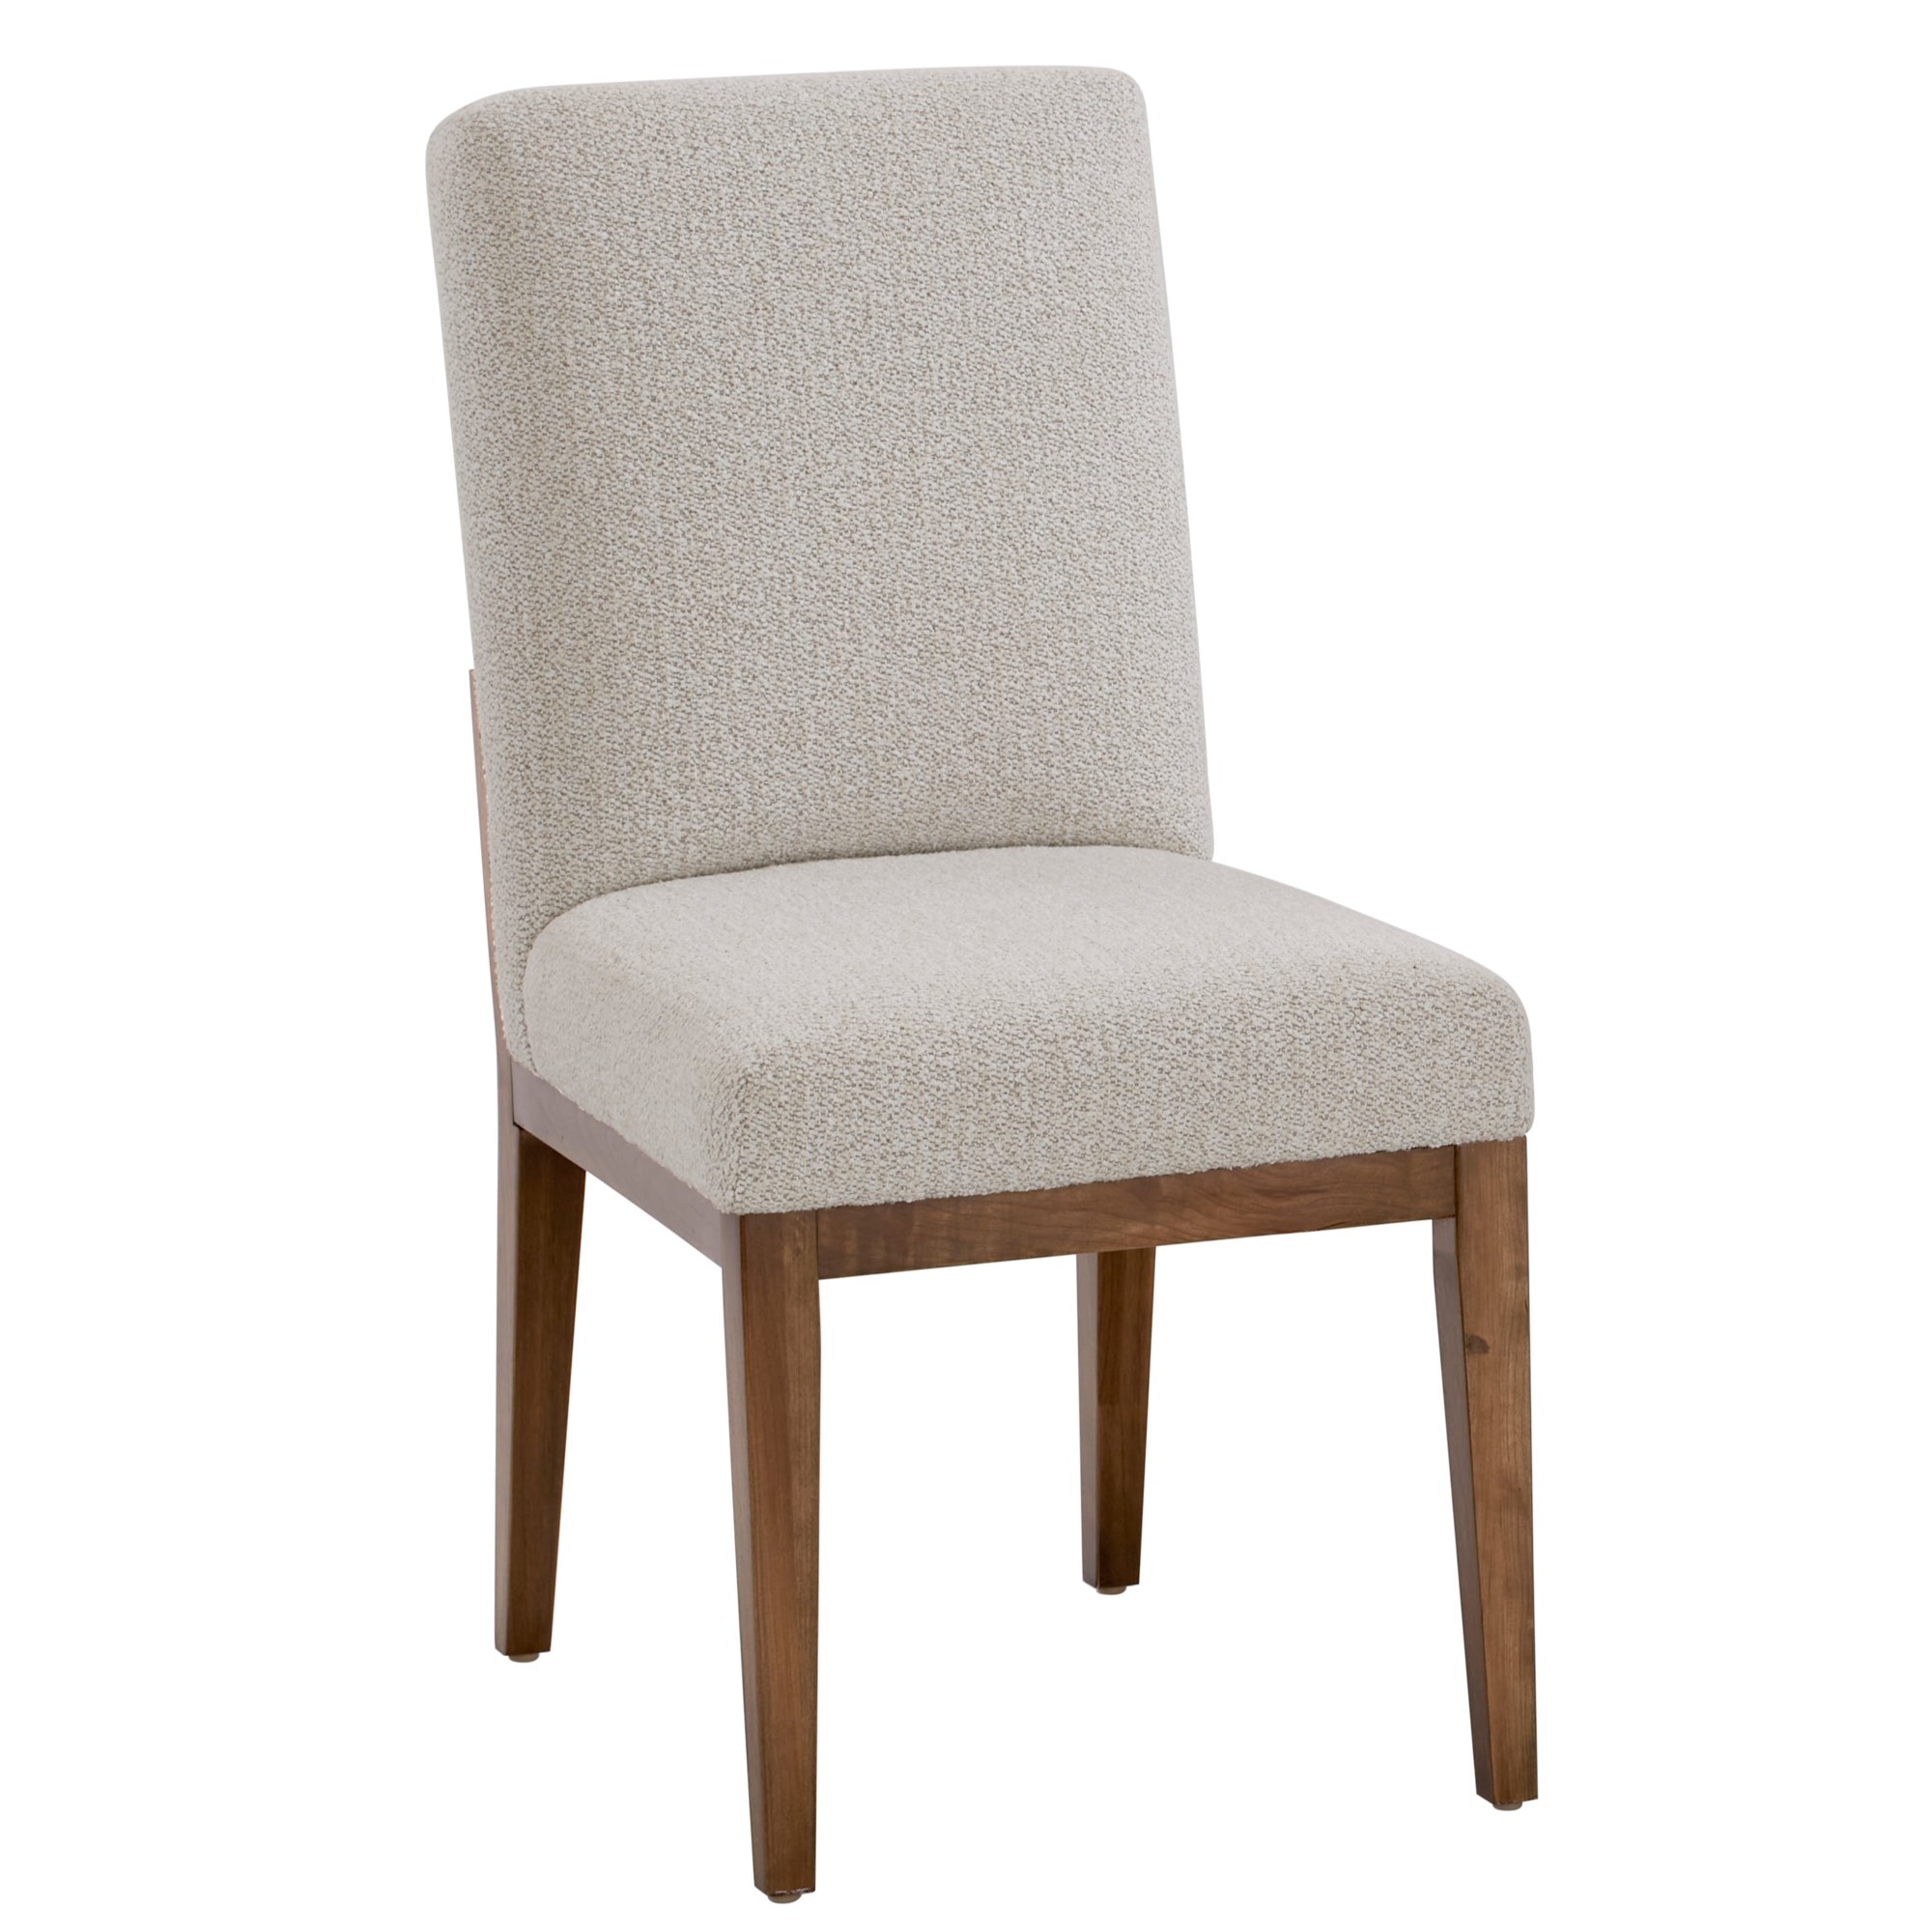 - Dining | Crafted Chair Chair Medium 151-030B Furniture Side Cherry Dining Side Vaughan - Contemporary Chairs Squirrel Brown | Upholstered Bassett